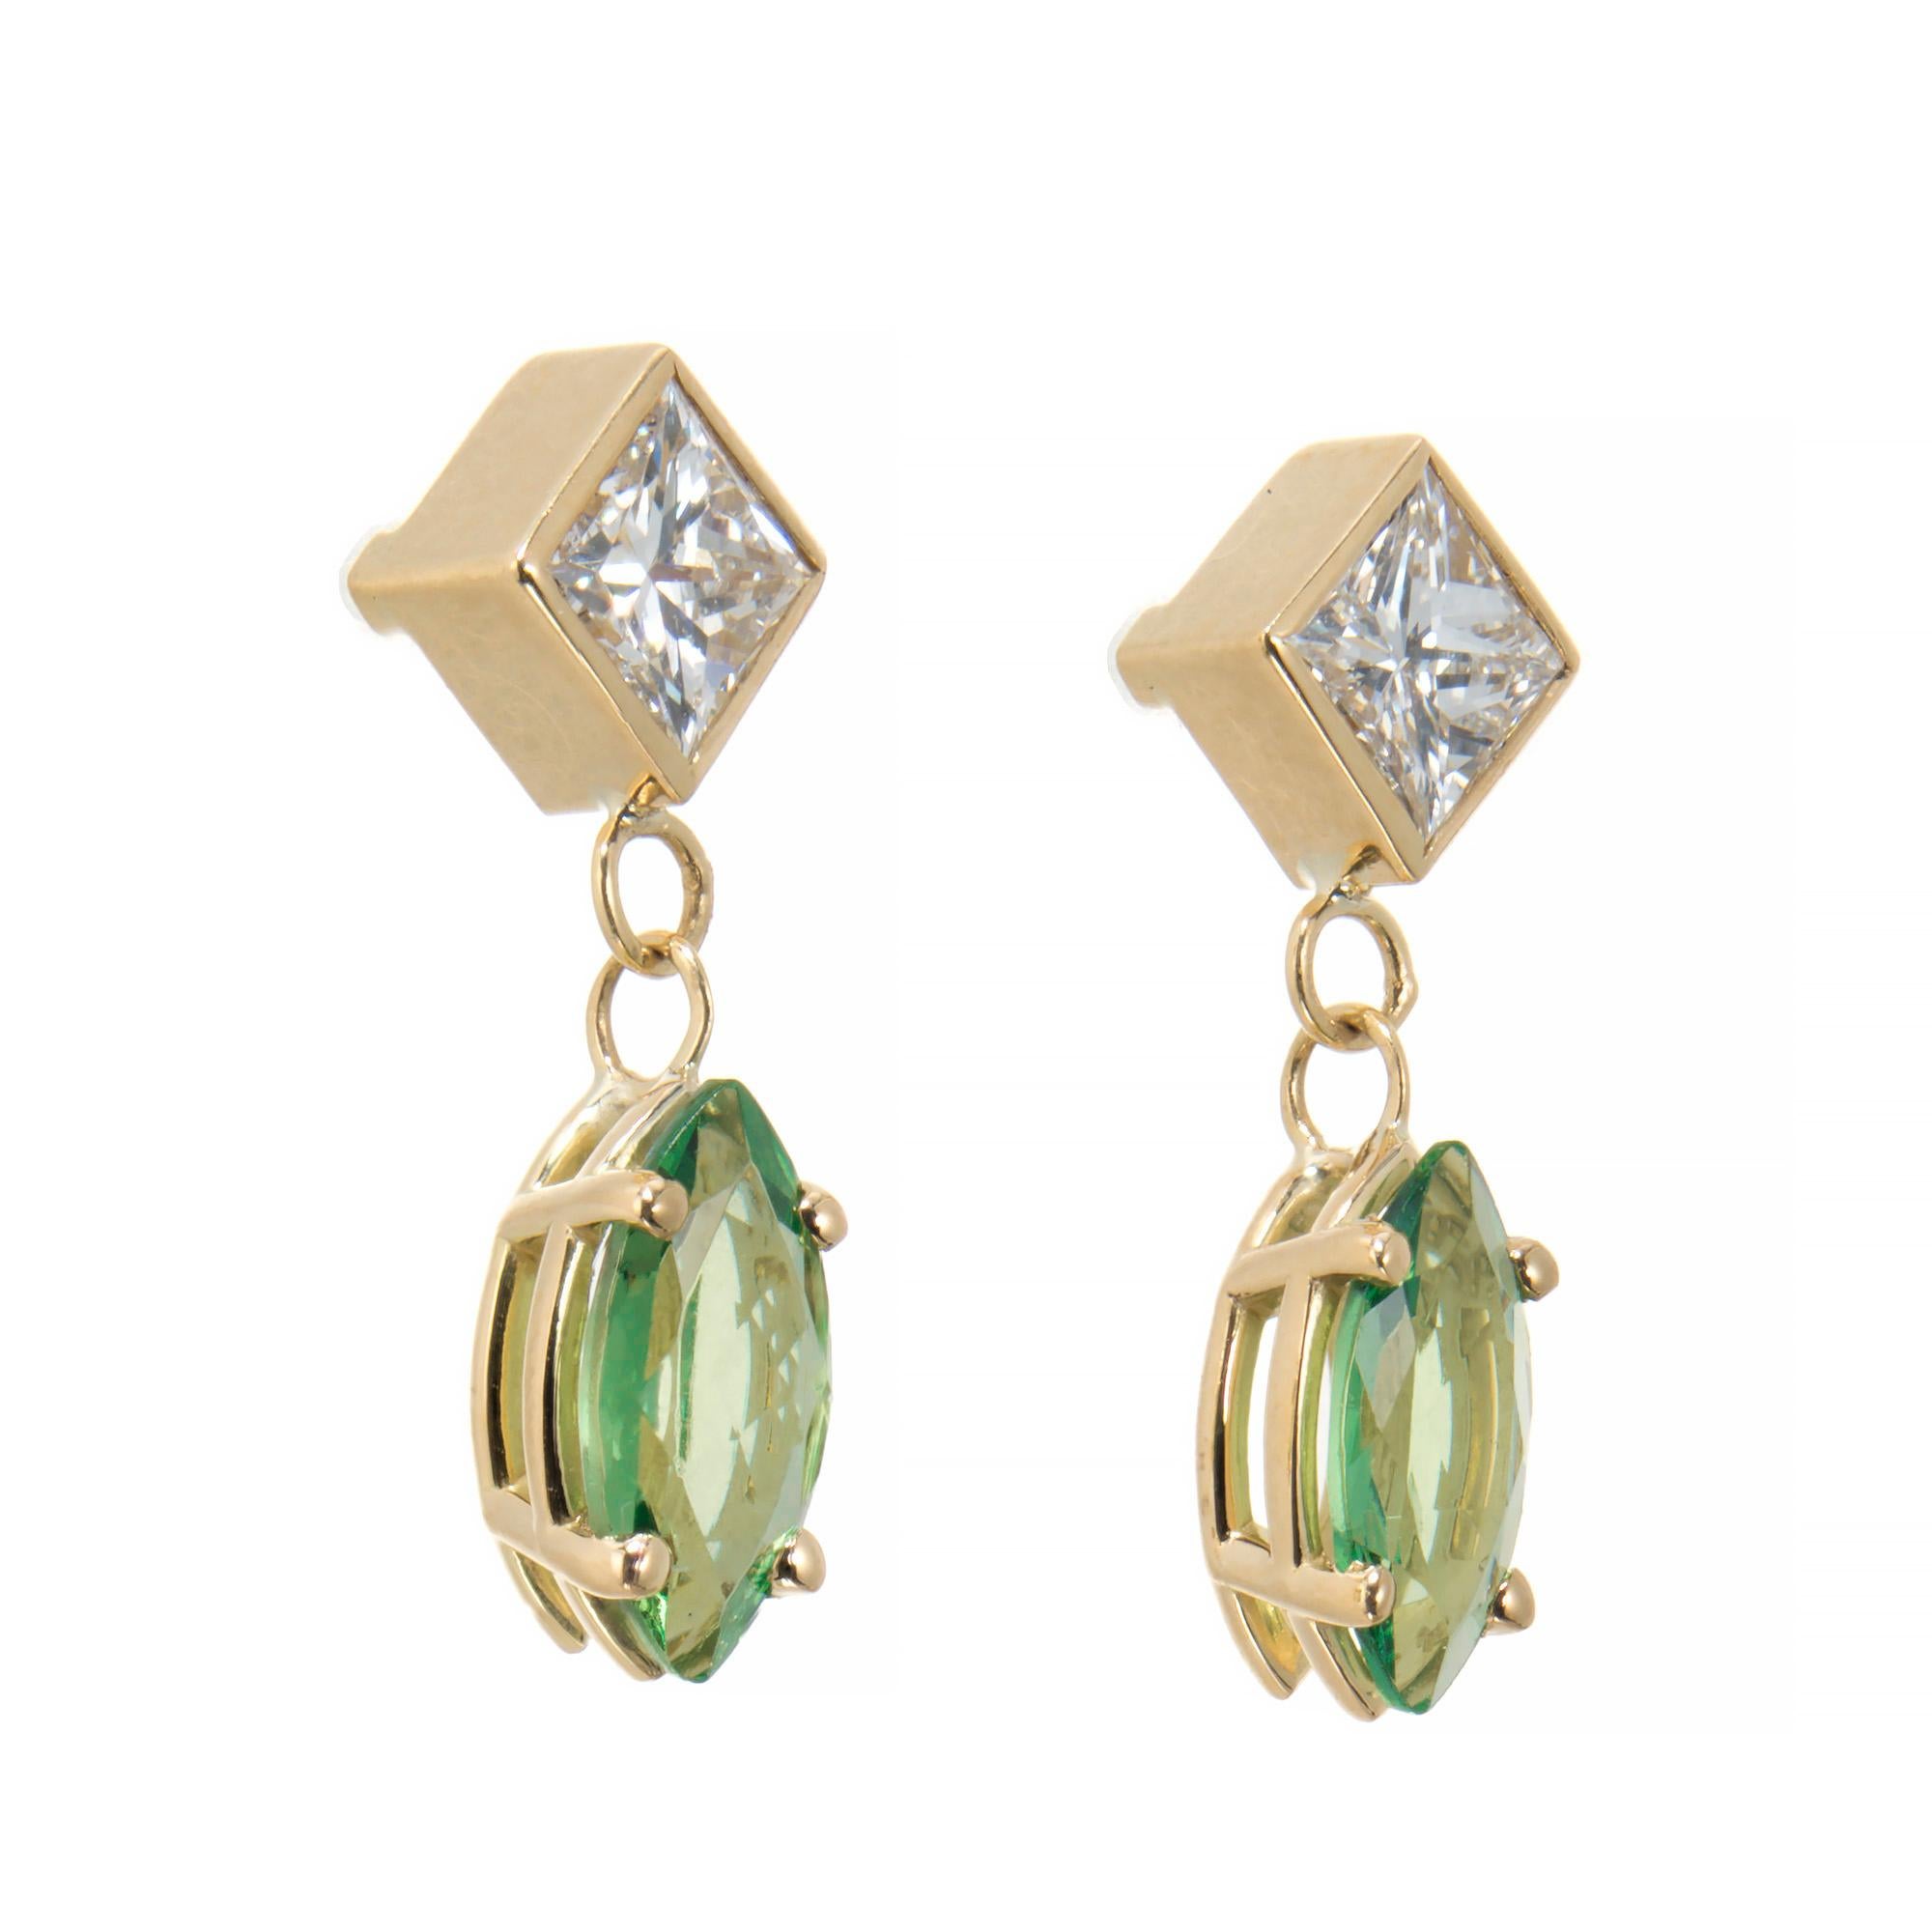 Tsavorite garnet and diamond dangle earrings. Two bright green marquise tsavorite garnet dangles set in simple four prong settings, accented with two white brilliant princess cut diamonds set in yellow gold bezels. Designed and crafted in the Peter